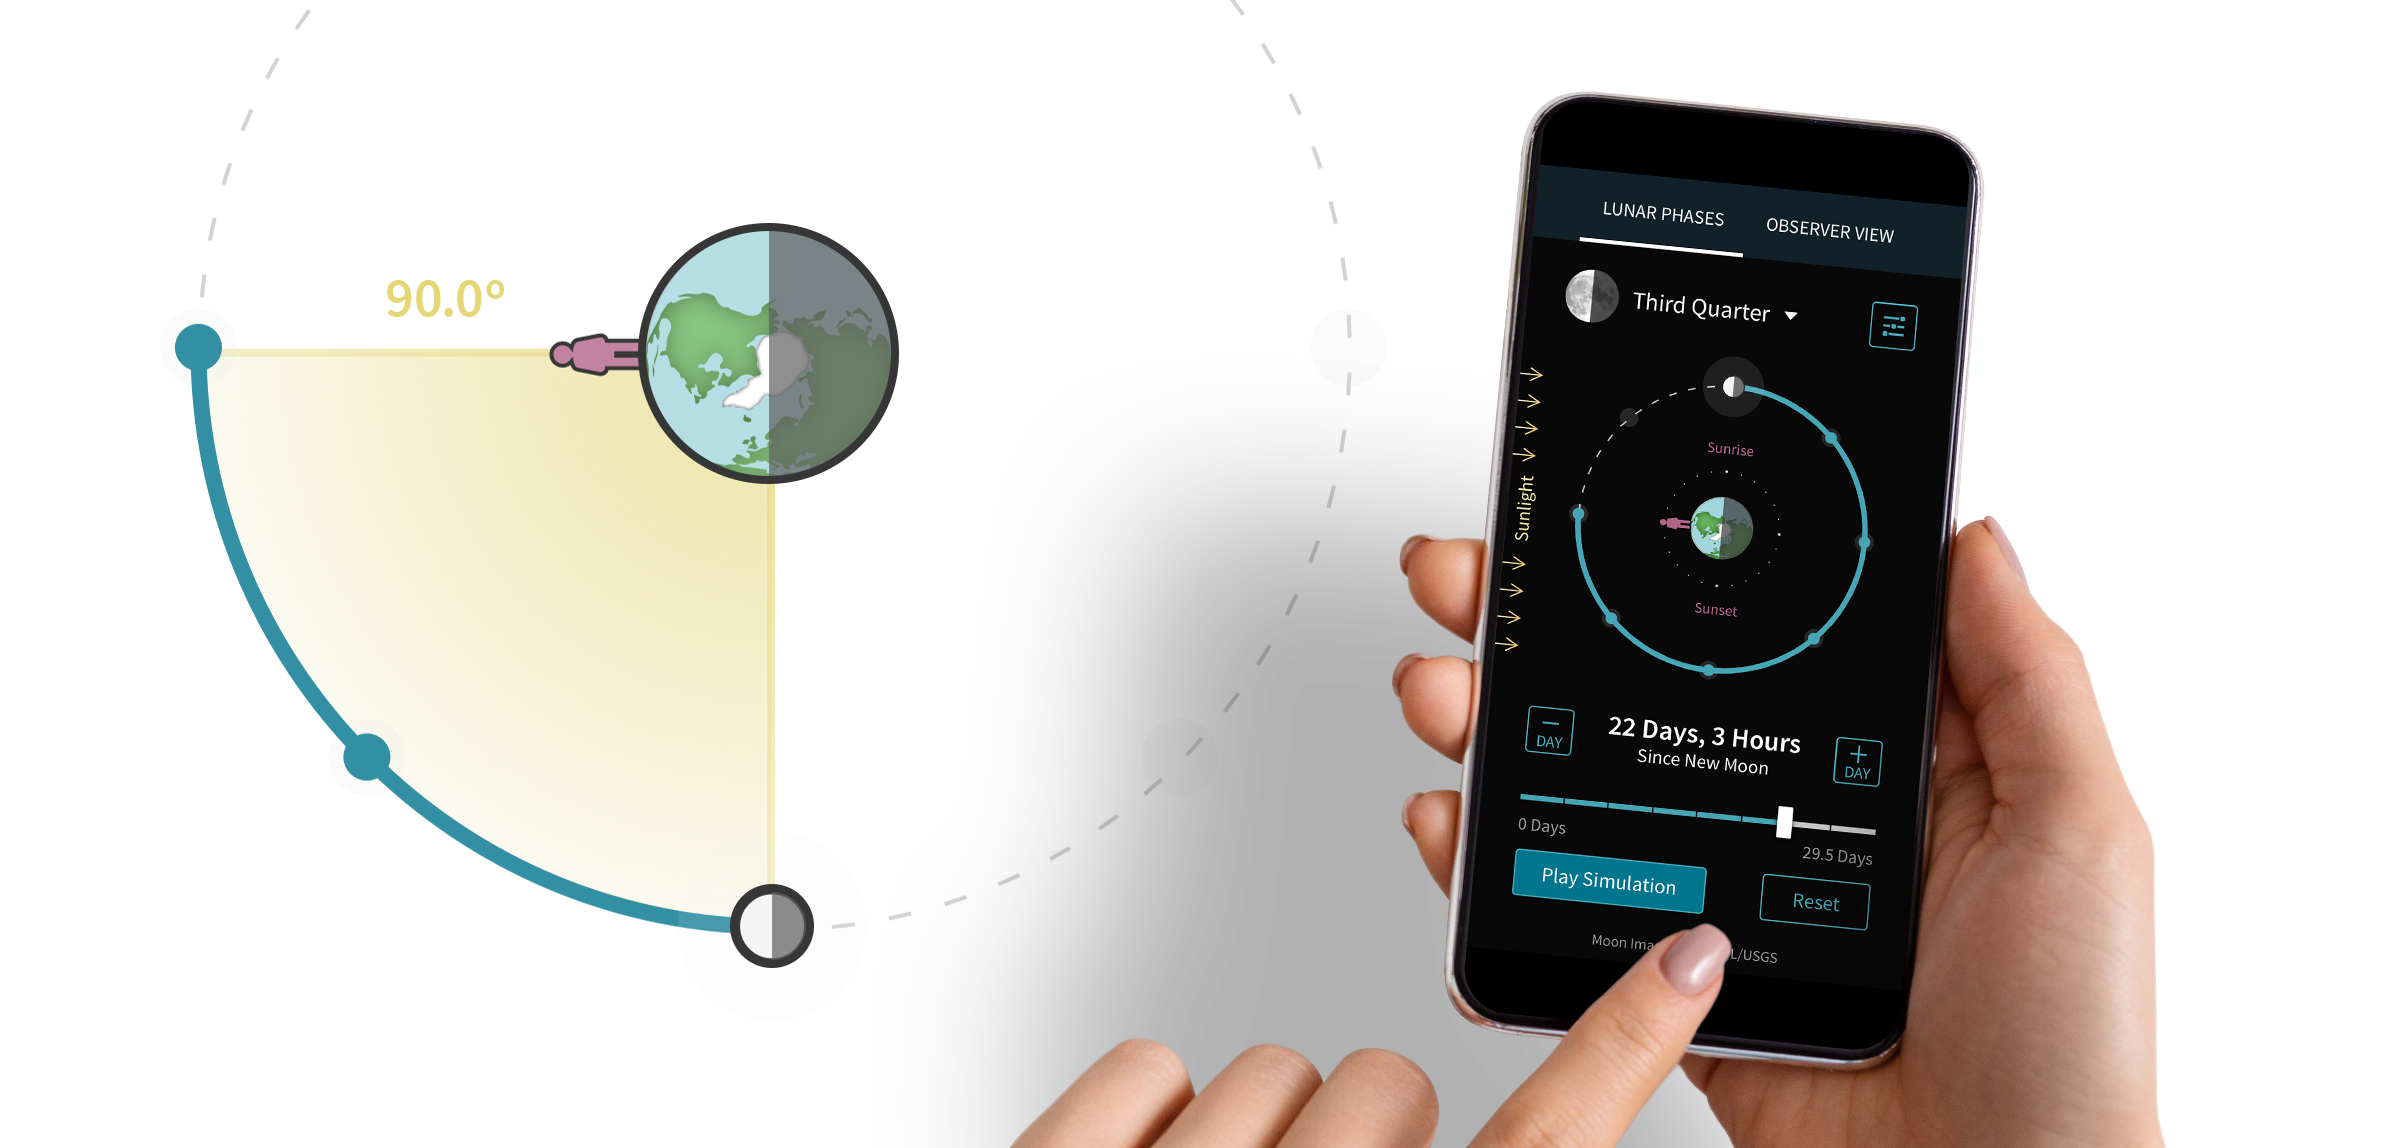 A smartphone being held that shows an astronomy interactive module on the screen. The module displays a circular diagram of the moon's position around the Earth with the direction of sunlight coming from the left side of the screen. A slider allows the user to see where the moon is positioned depending upon the number of days since the last new moon.